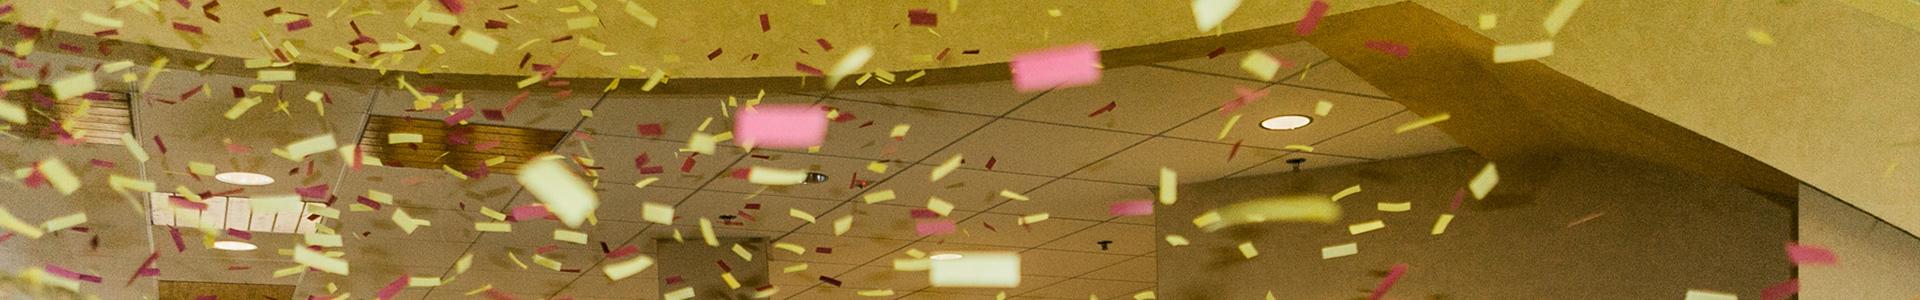 Confetti in the air in Kiehle Building Rotunda during the Torch & Shield Event